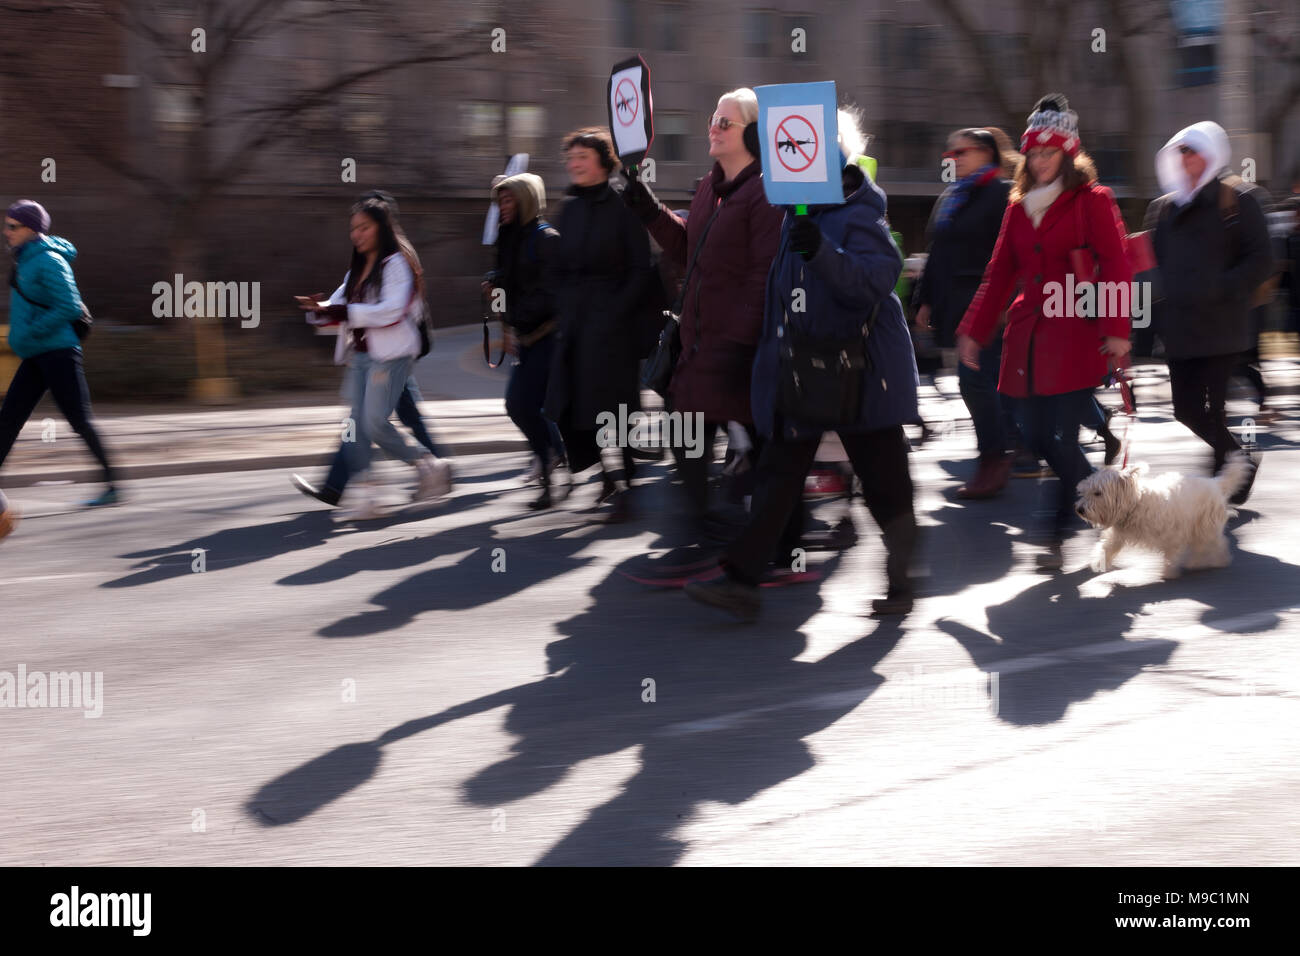 Toronto, Ontario, Canada. 24th March, 2018. Protestors calling for an end to gun violence march in Toronto, Ontario, Canada on March 24, 2018. The protest was part of the March For Our Lives moment taking place in cities across North America in response to the February shooting at Marjory Stoneman Douglas High School in Florida where 17 students were shot dead. Credit: Mark Spowart/Alamy Live News Stock Photo